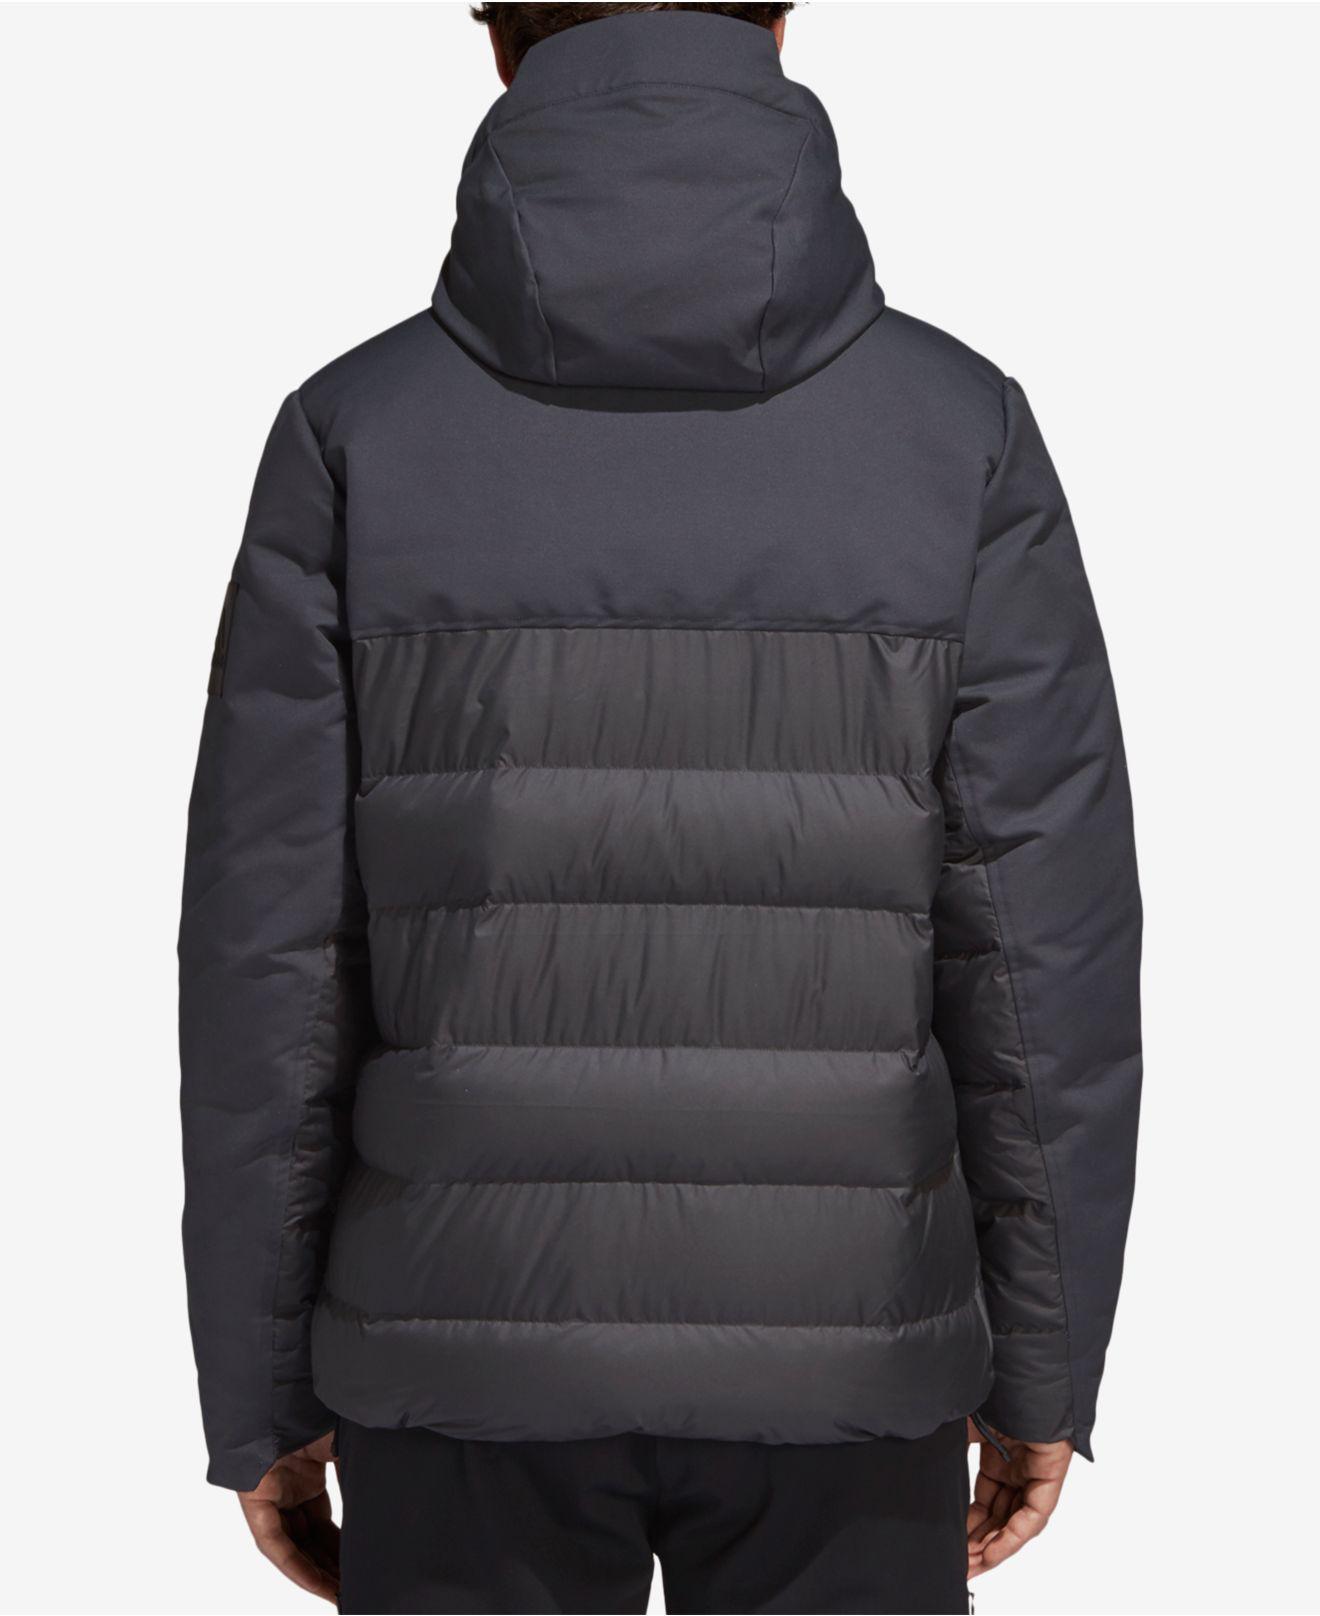 adidas Climawarm® Down Jacket in Black for Men - Lyst